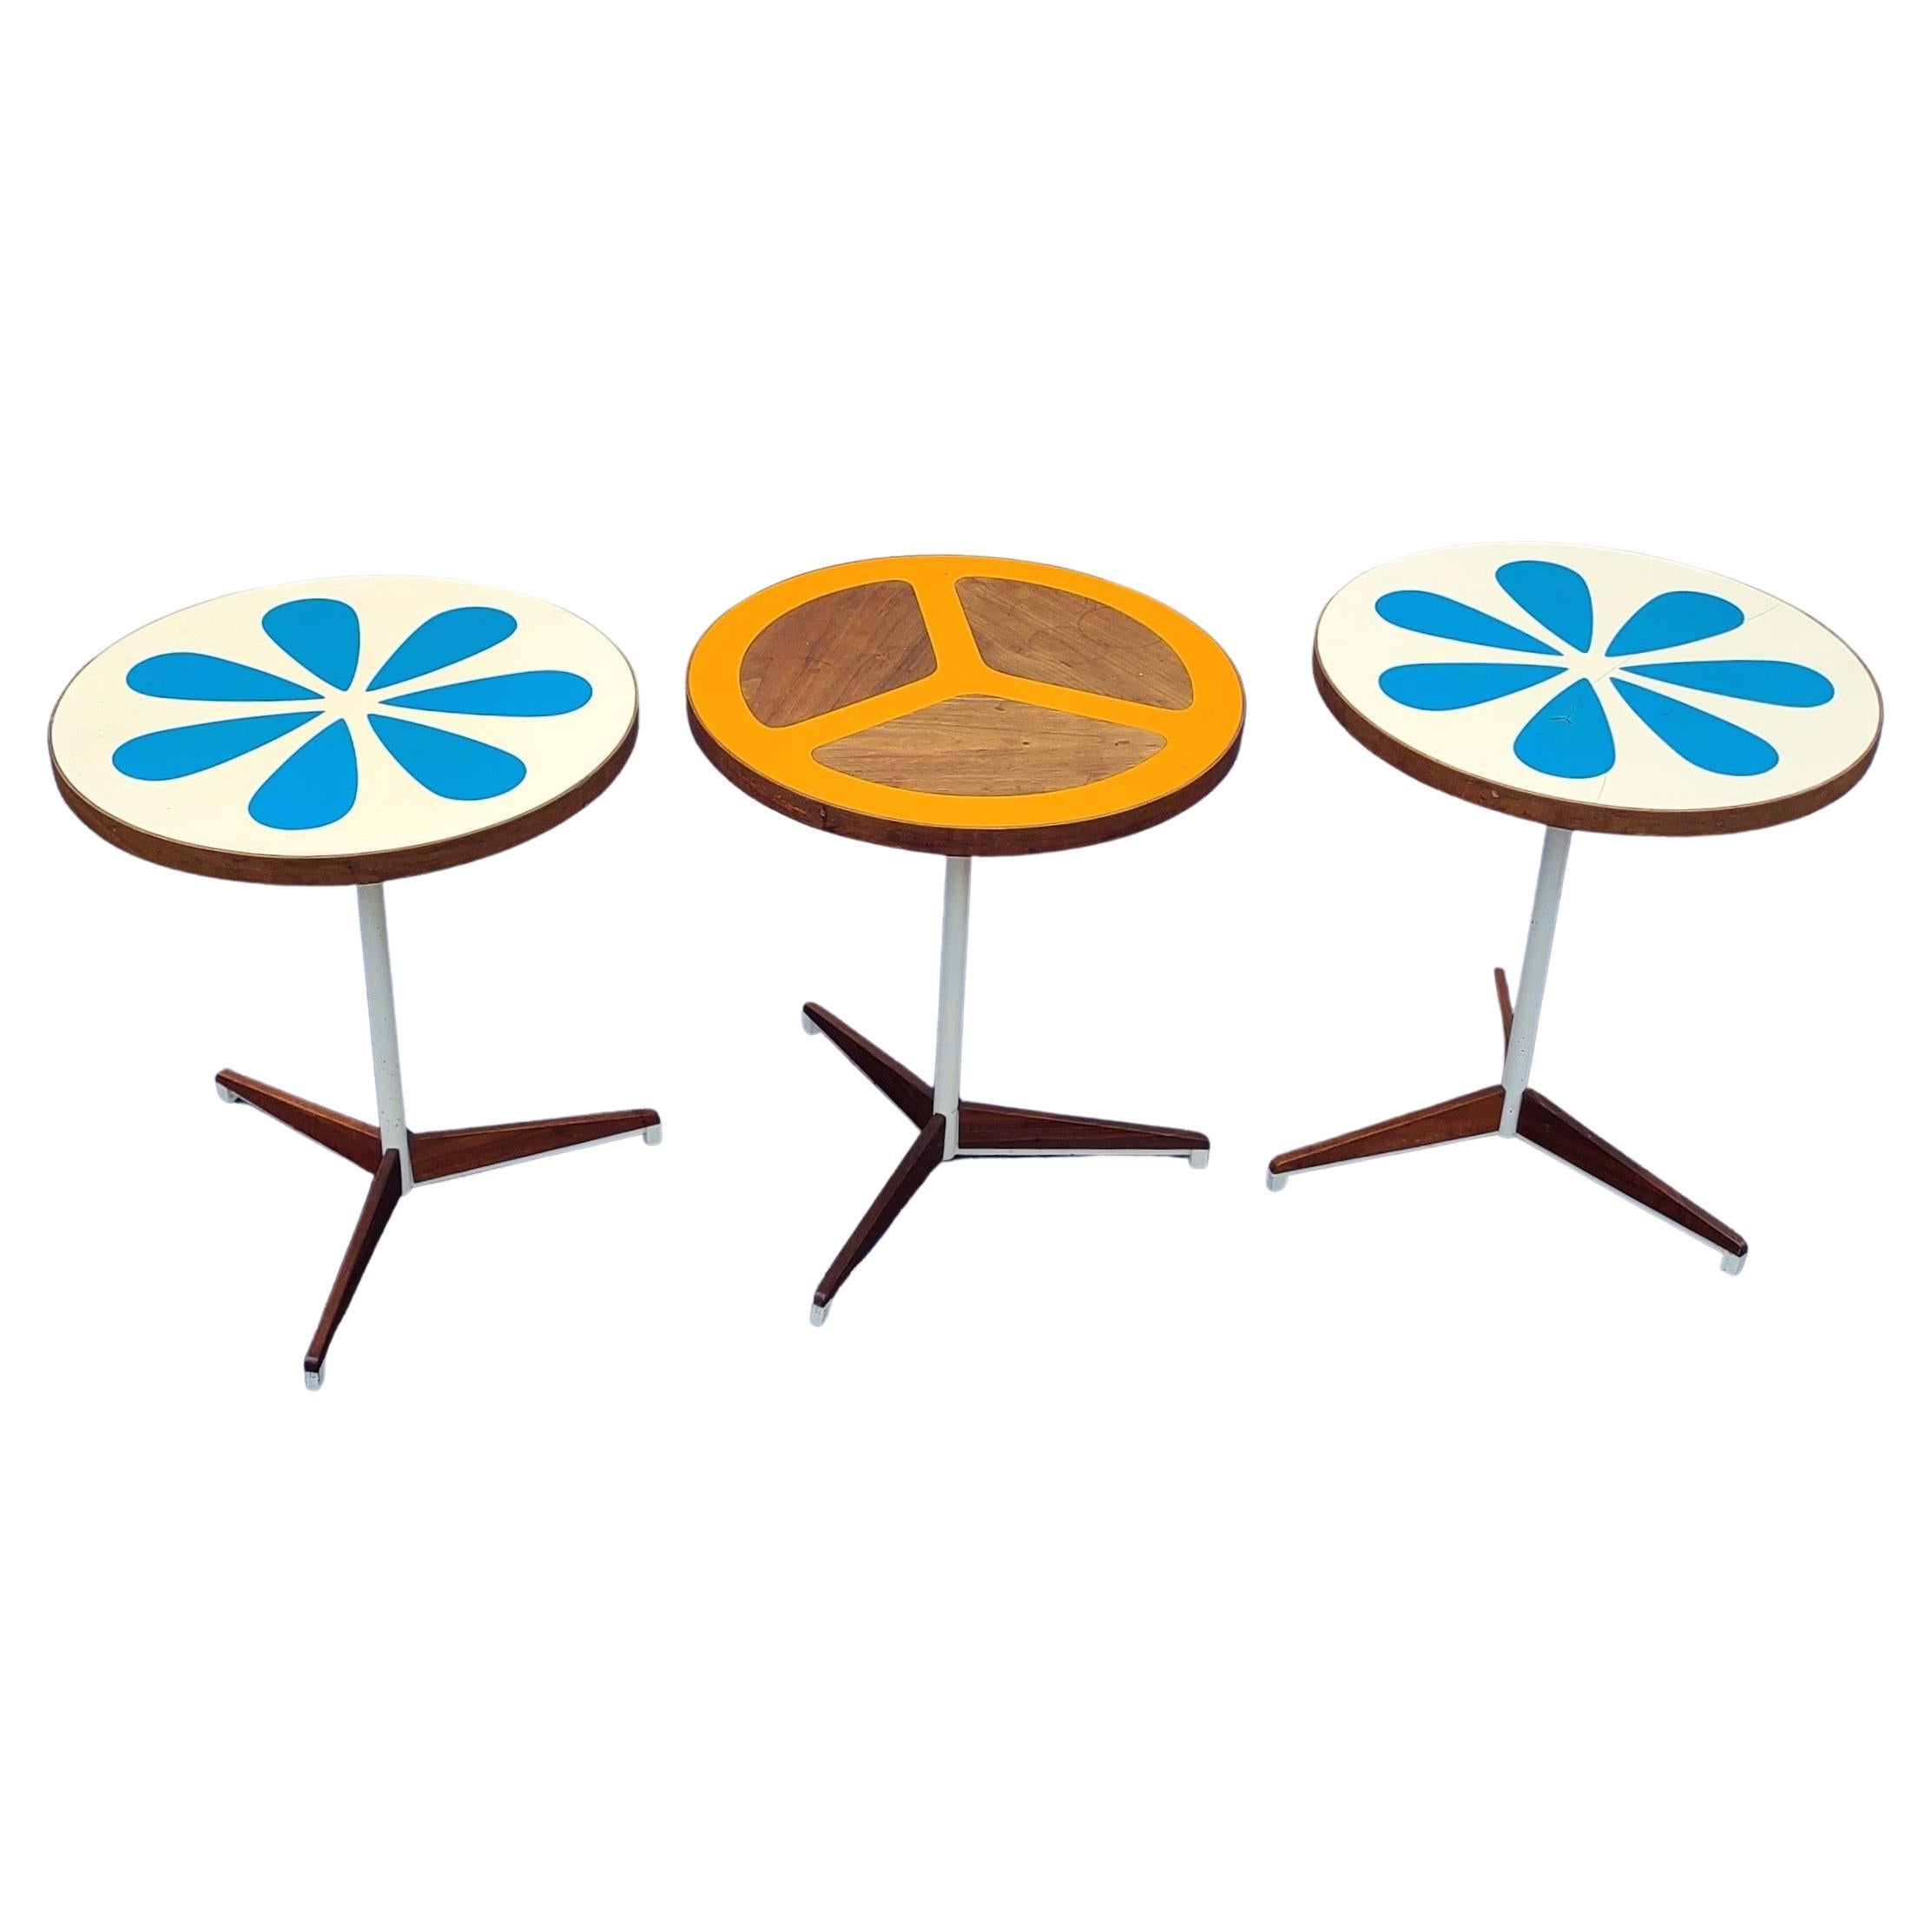 Please message us for a cost effective shipping quote to your location.

Set of 3 California Modern Adjustable Pedestal Tables. Designed by Don Savage and Howard McNab for Peter Pepper Products. Plastic Resin Tecnique with Walnut details. One blue